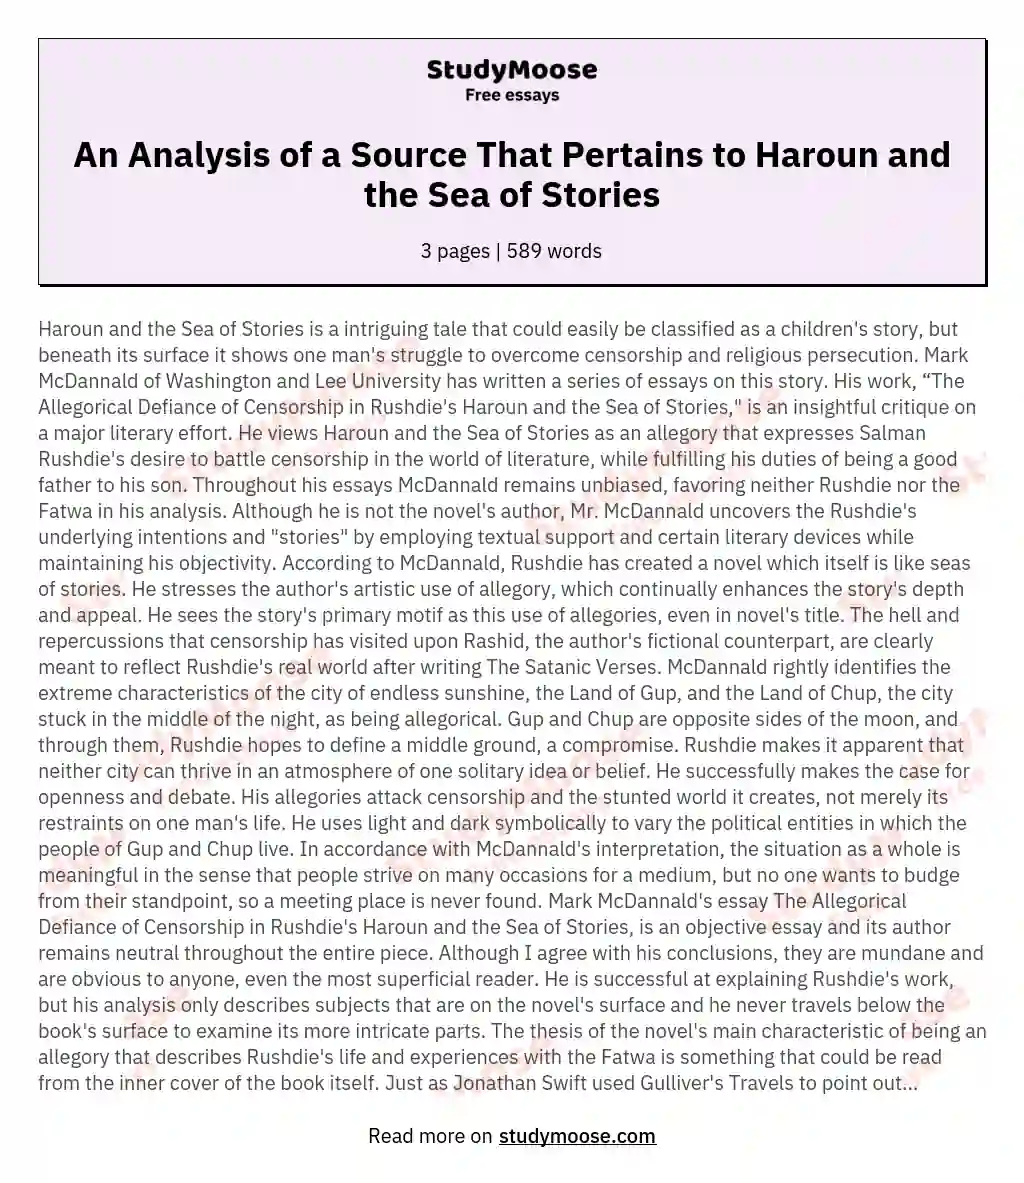 An Analysis of a Source That Pertains to Haroun and the Sea of Stories essay